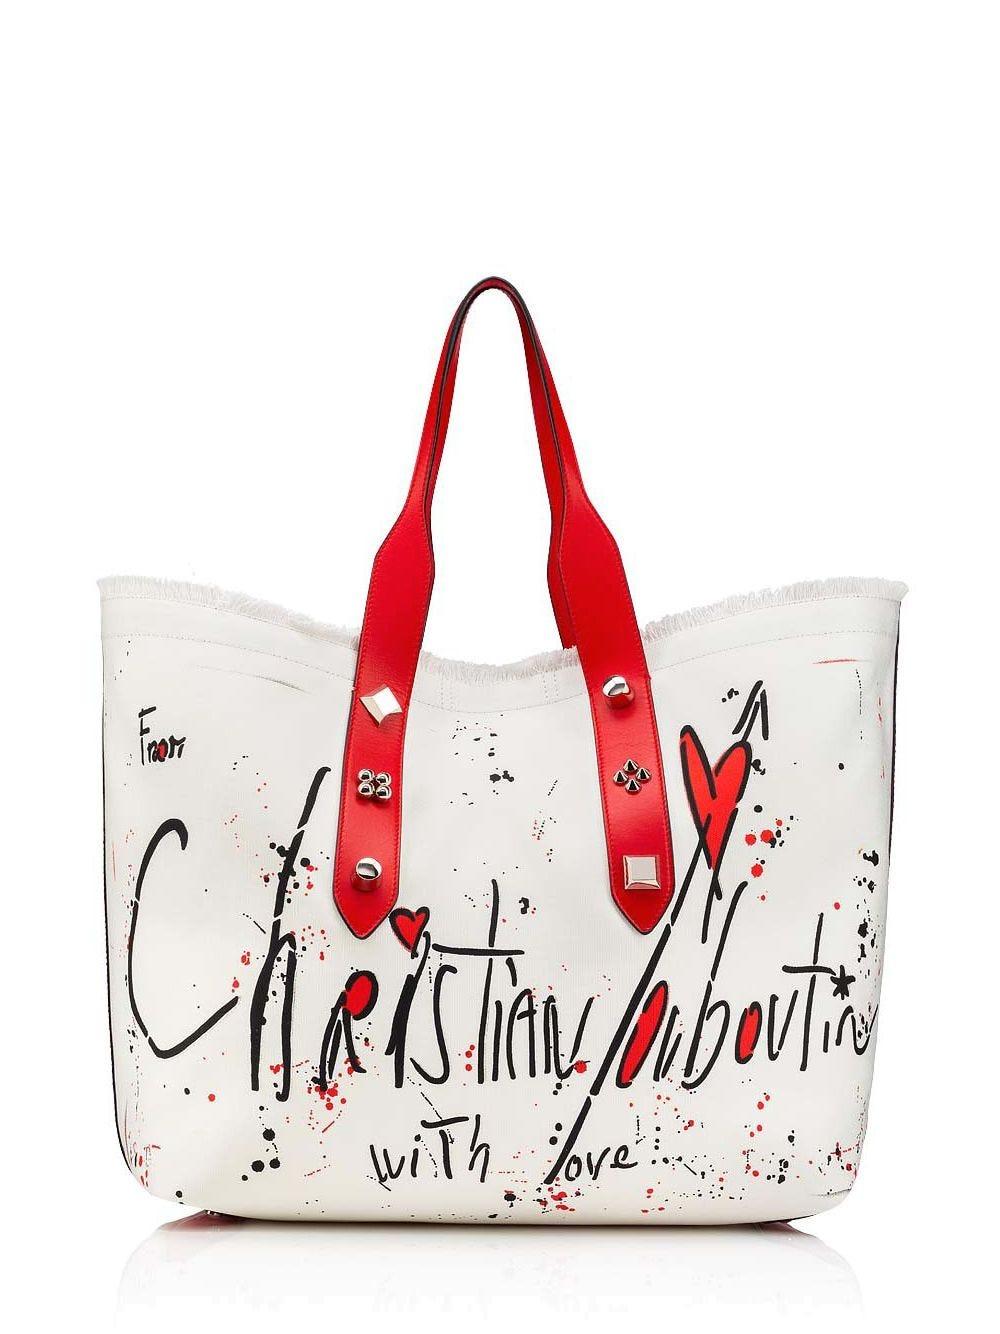 CHRISTIAN LOUBOUTIN: Frangibus canvas and leather bag - Natural